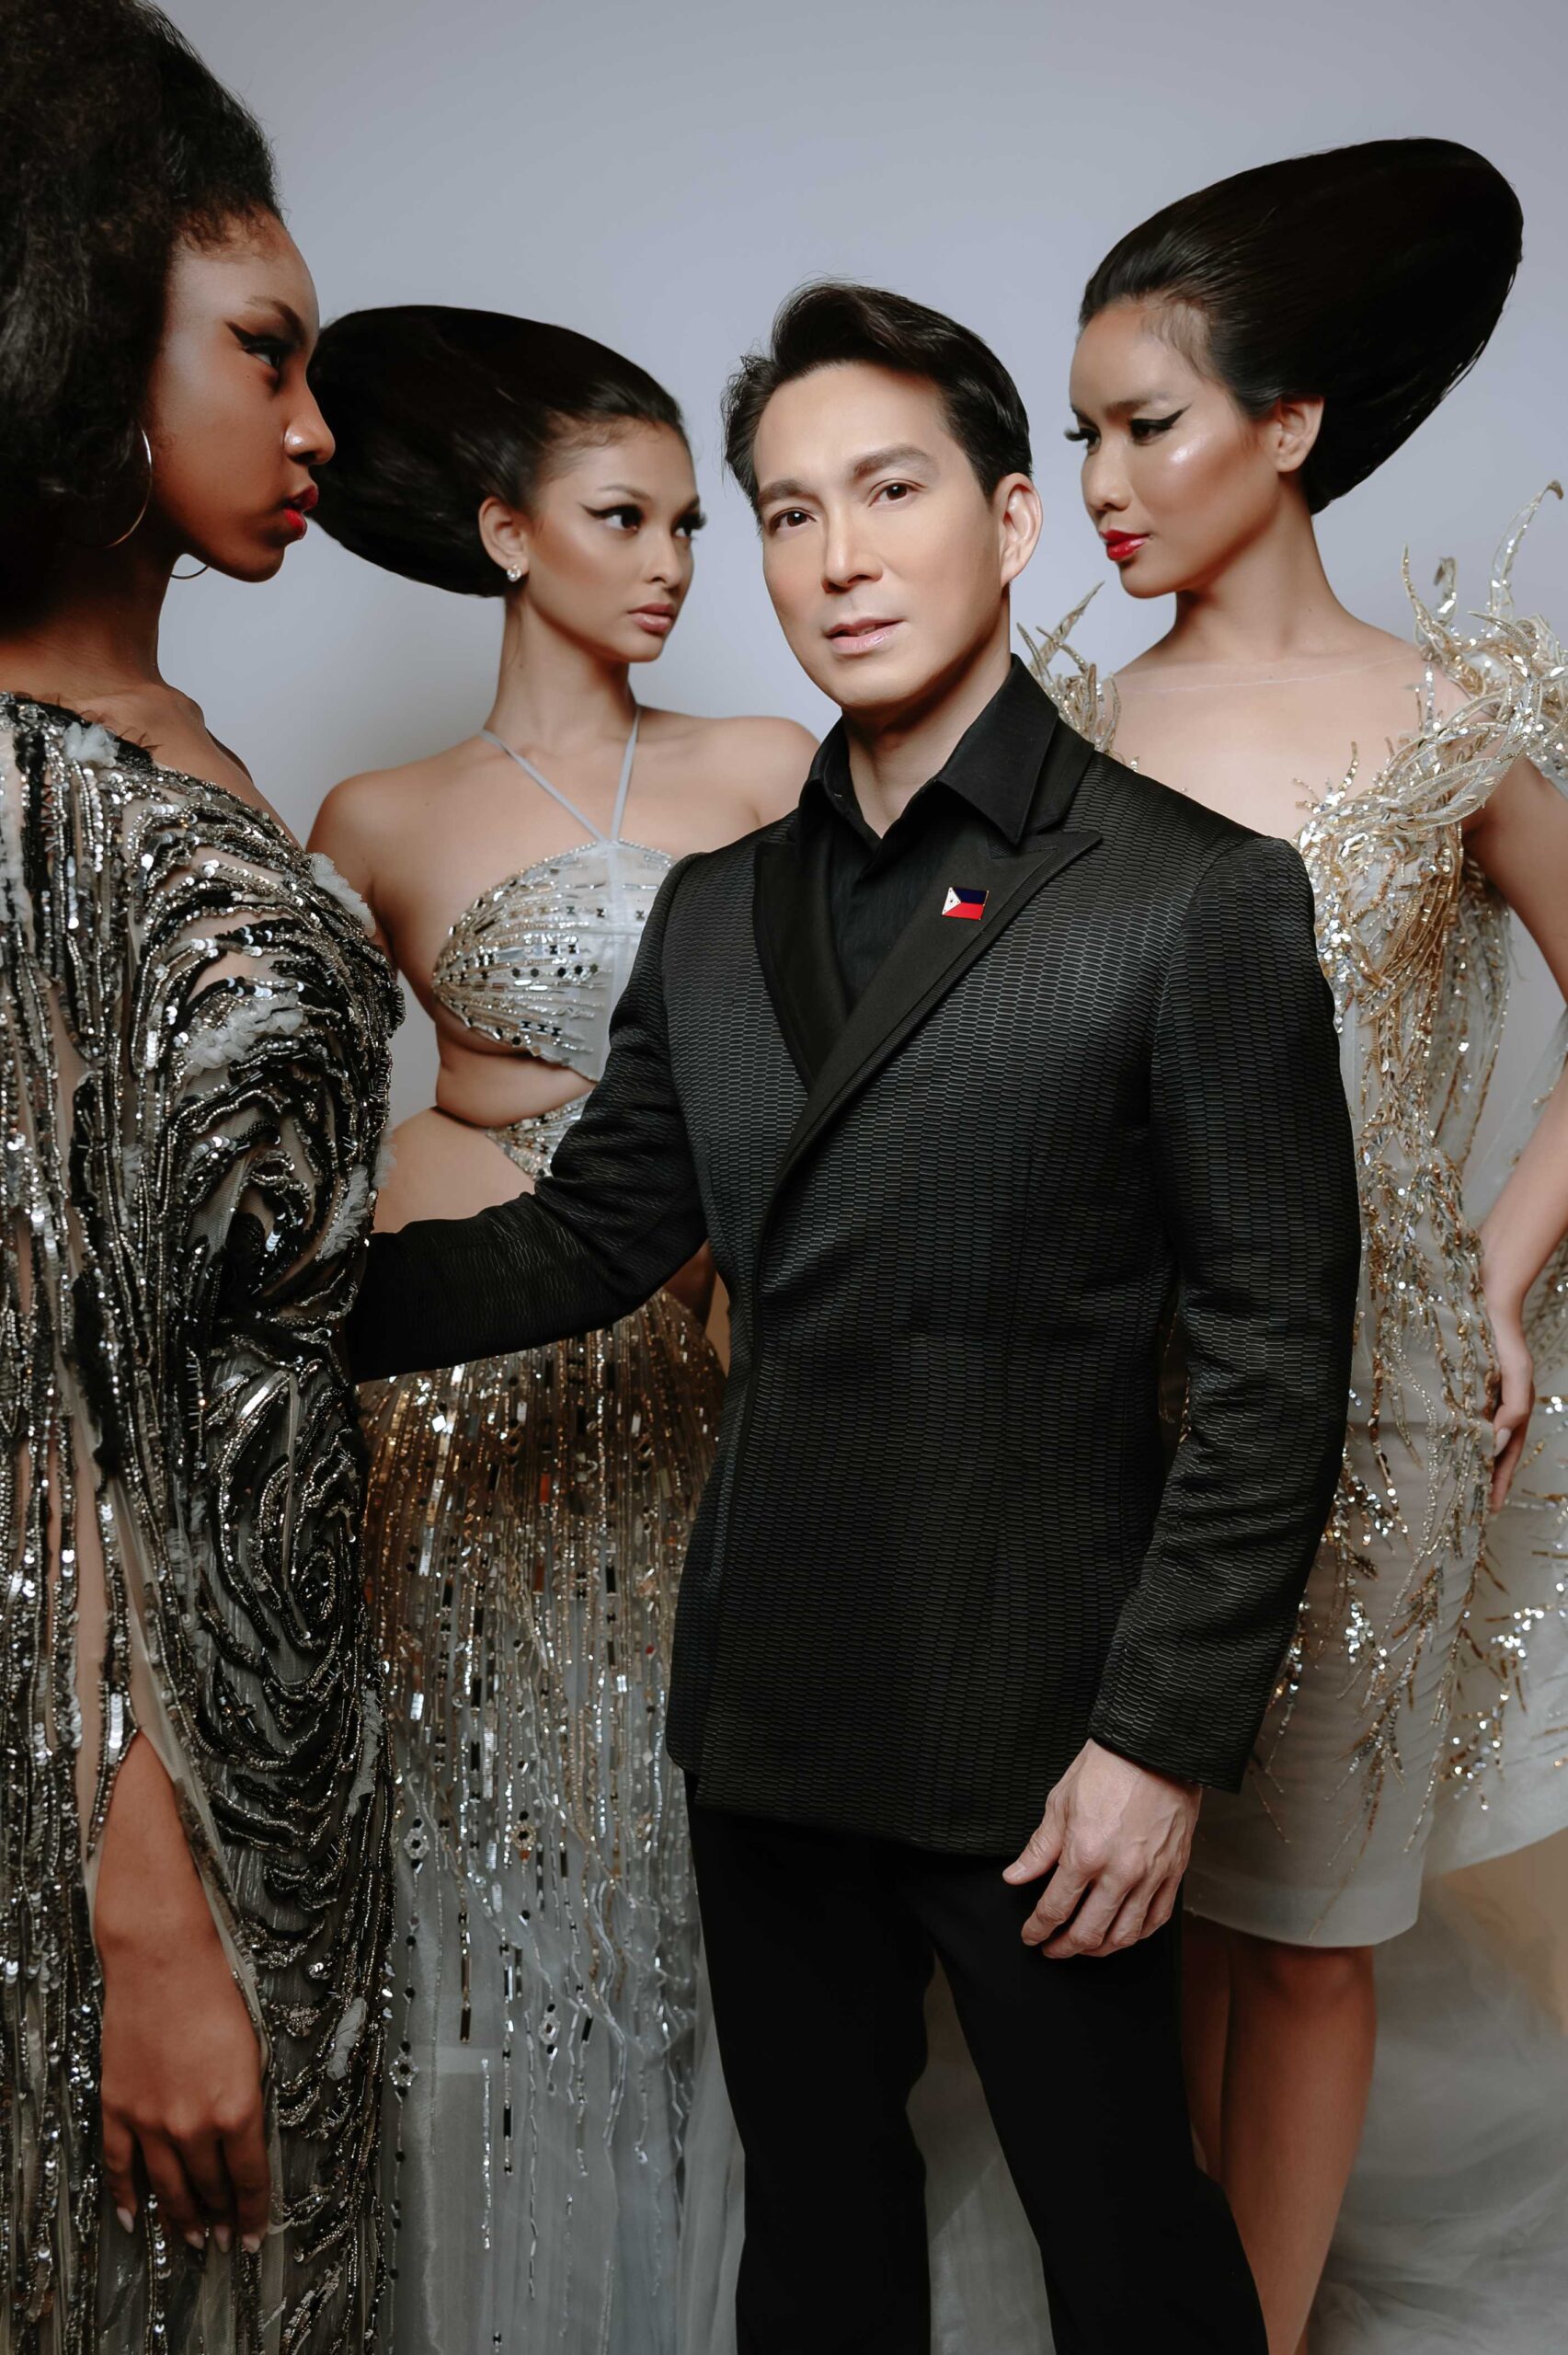 Libiran showed his brand’s commitment to sophistication through his works